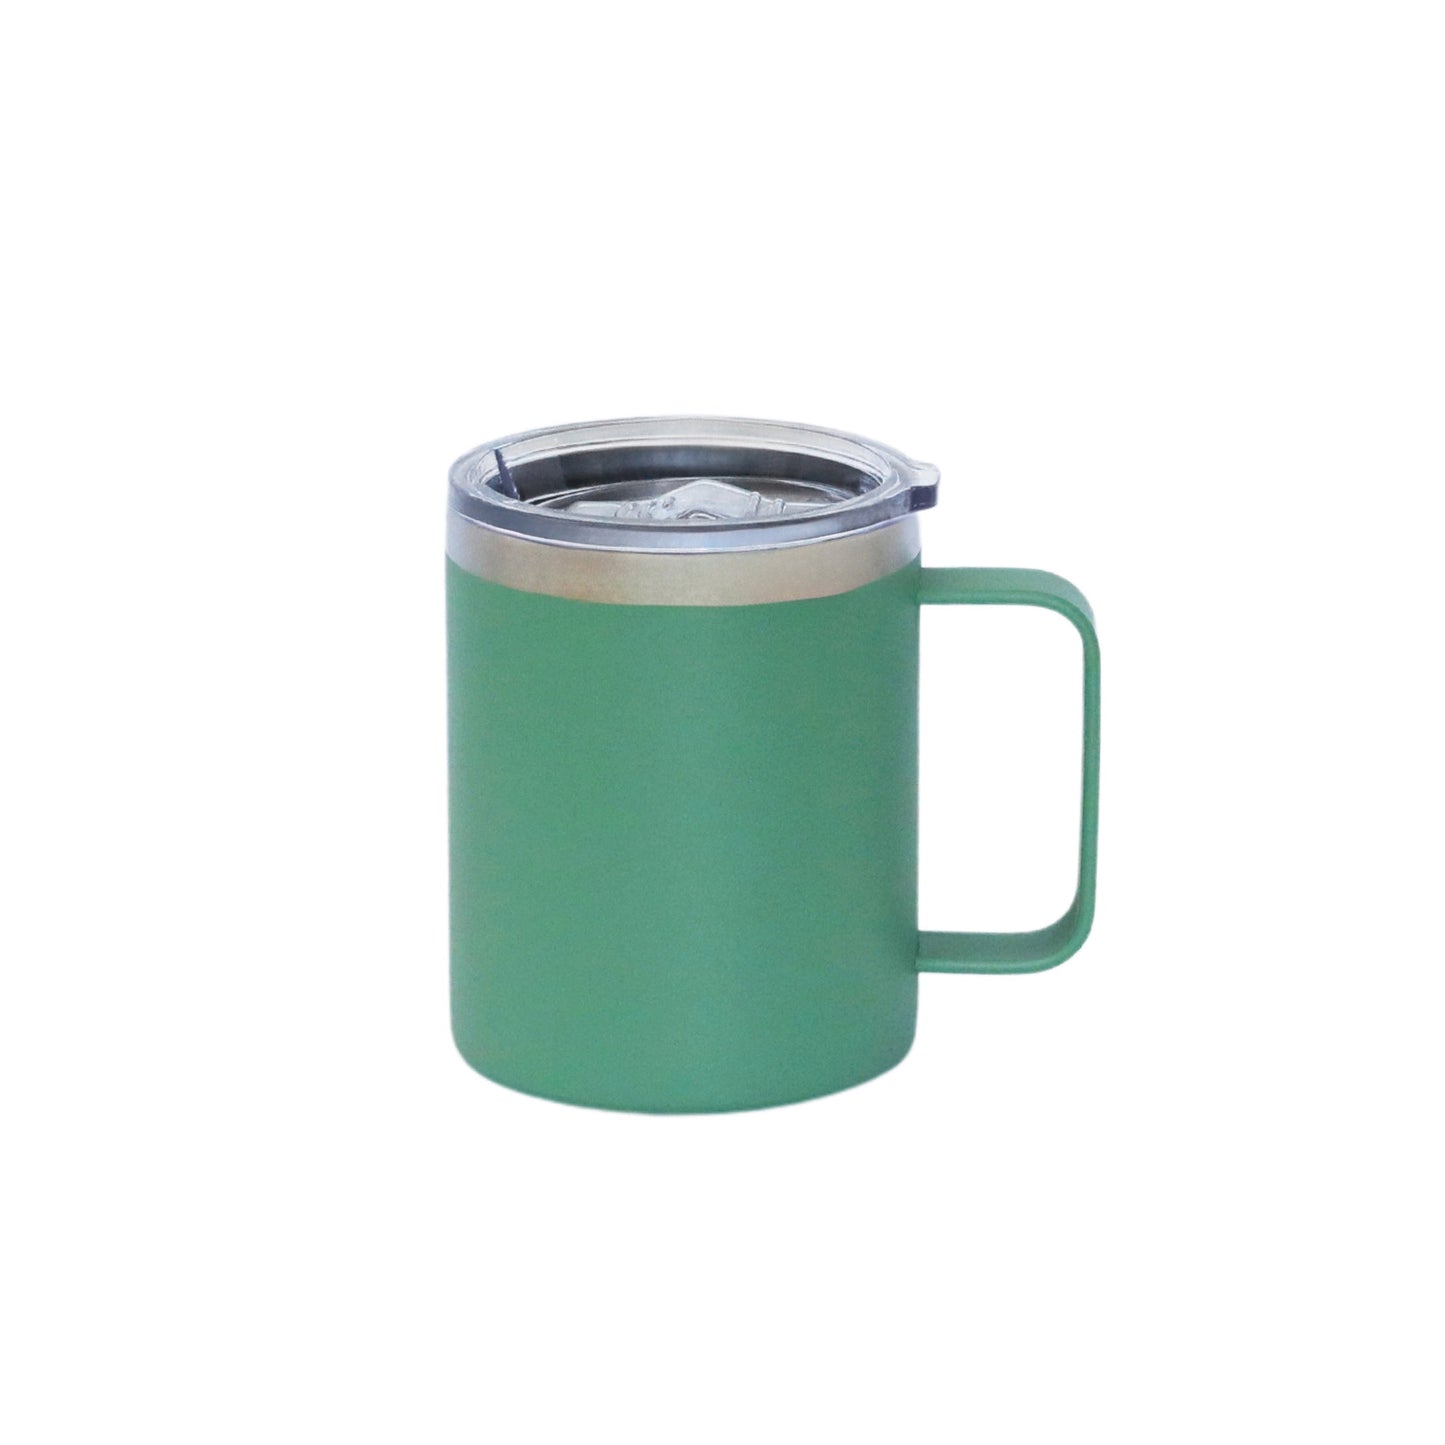 12 Oz Stainless Steel Travel Mug with Handle - Green by Creative Gifts